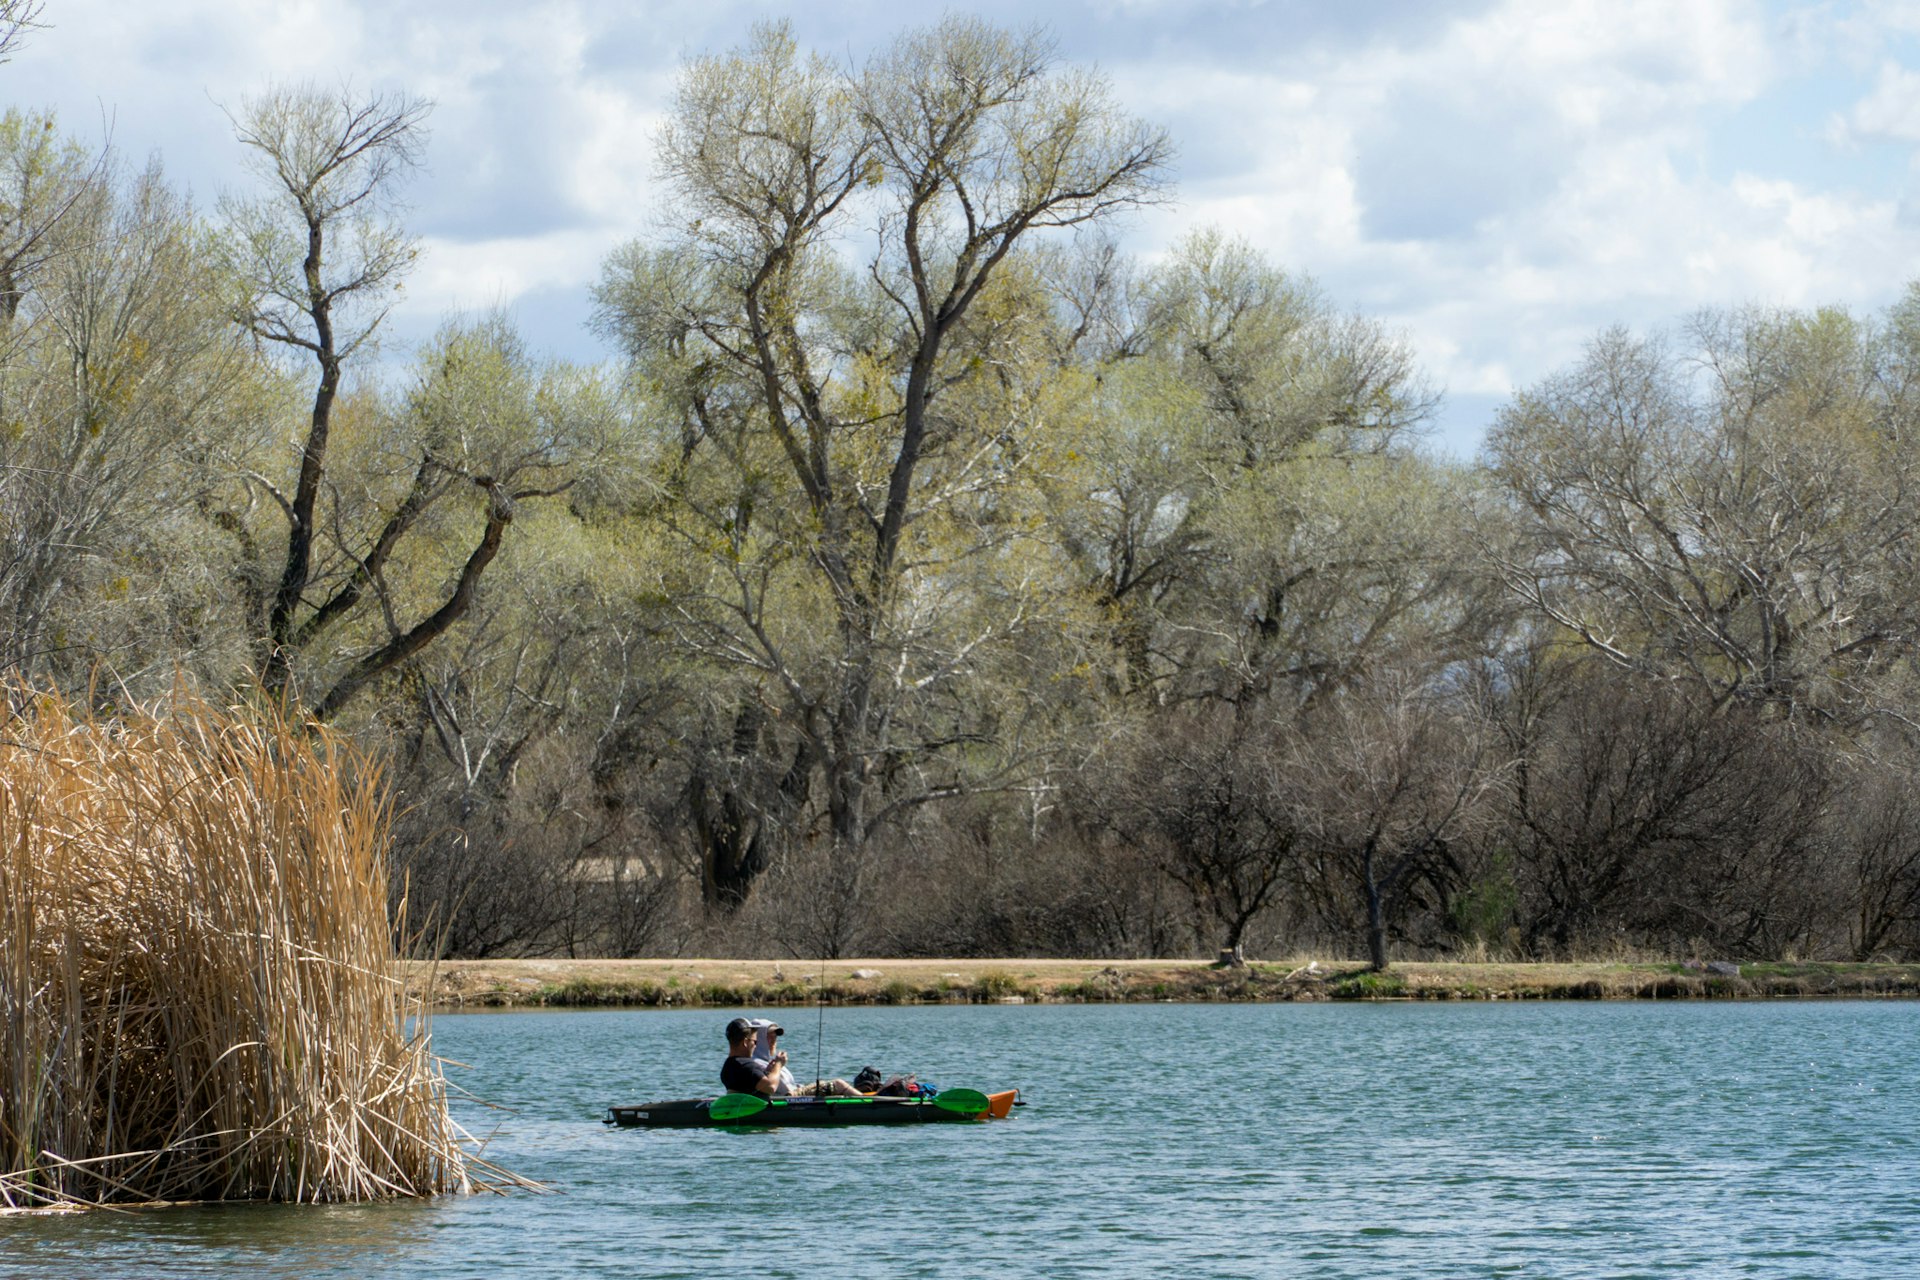 Two people with fishing rods sit on a kayak in a calm lake